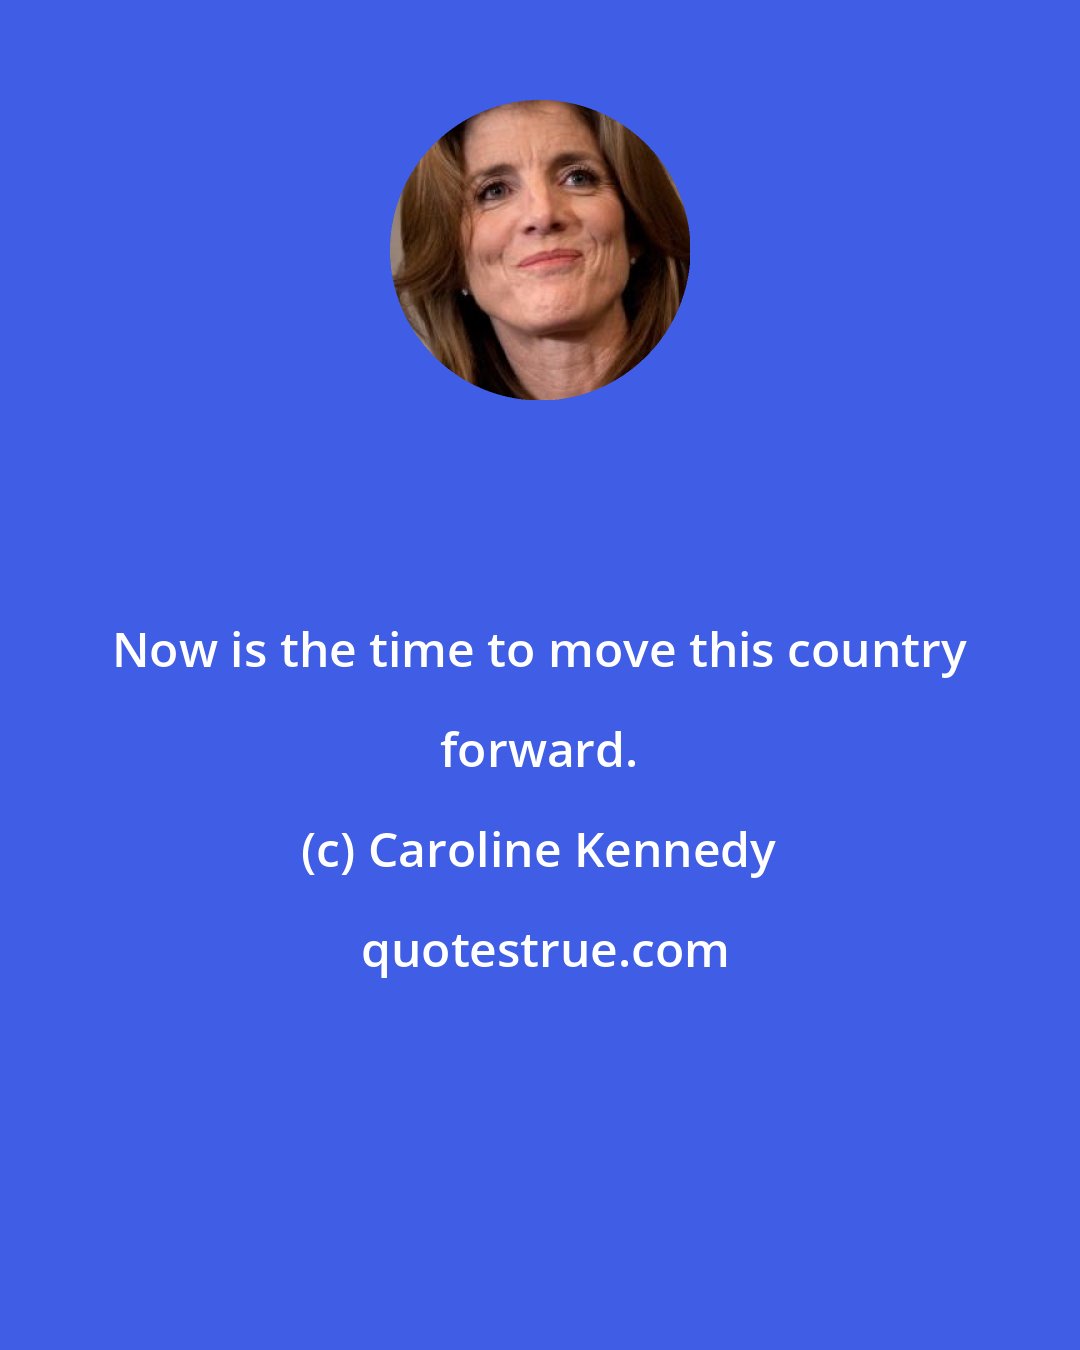 Caroline Kennedy: Now is the time to move this country forward.